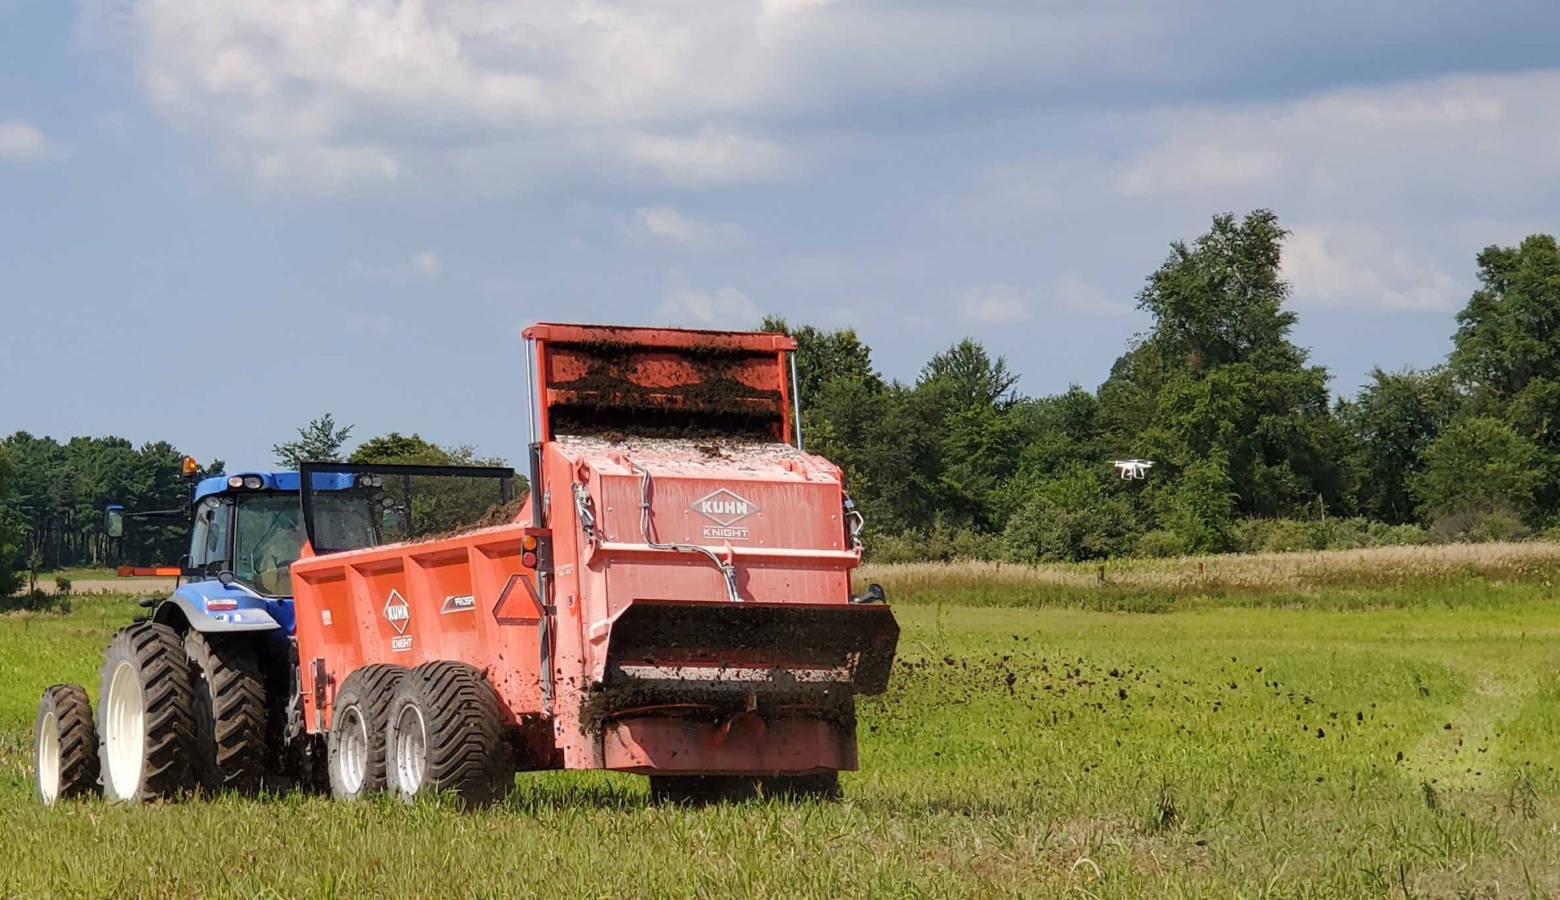 Companies demonstrate their solid manure spreaders out in the field to expo attendees. (Samantha Horton/IPB News)